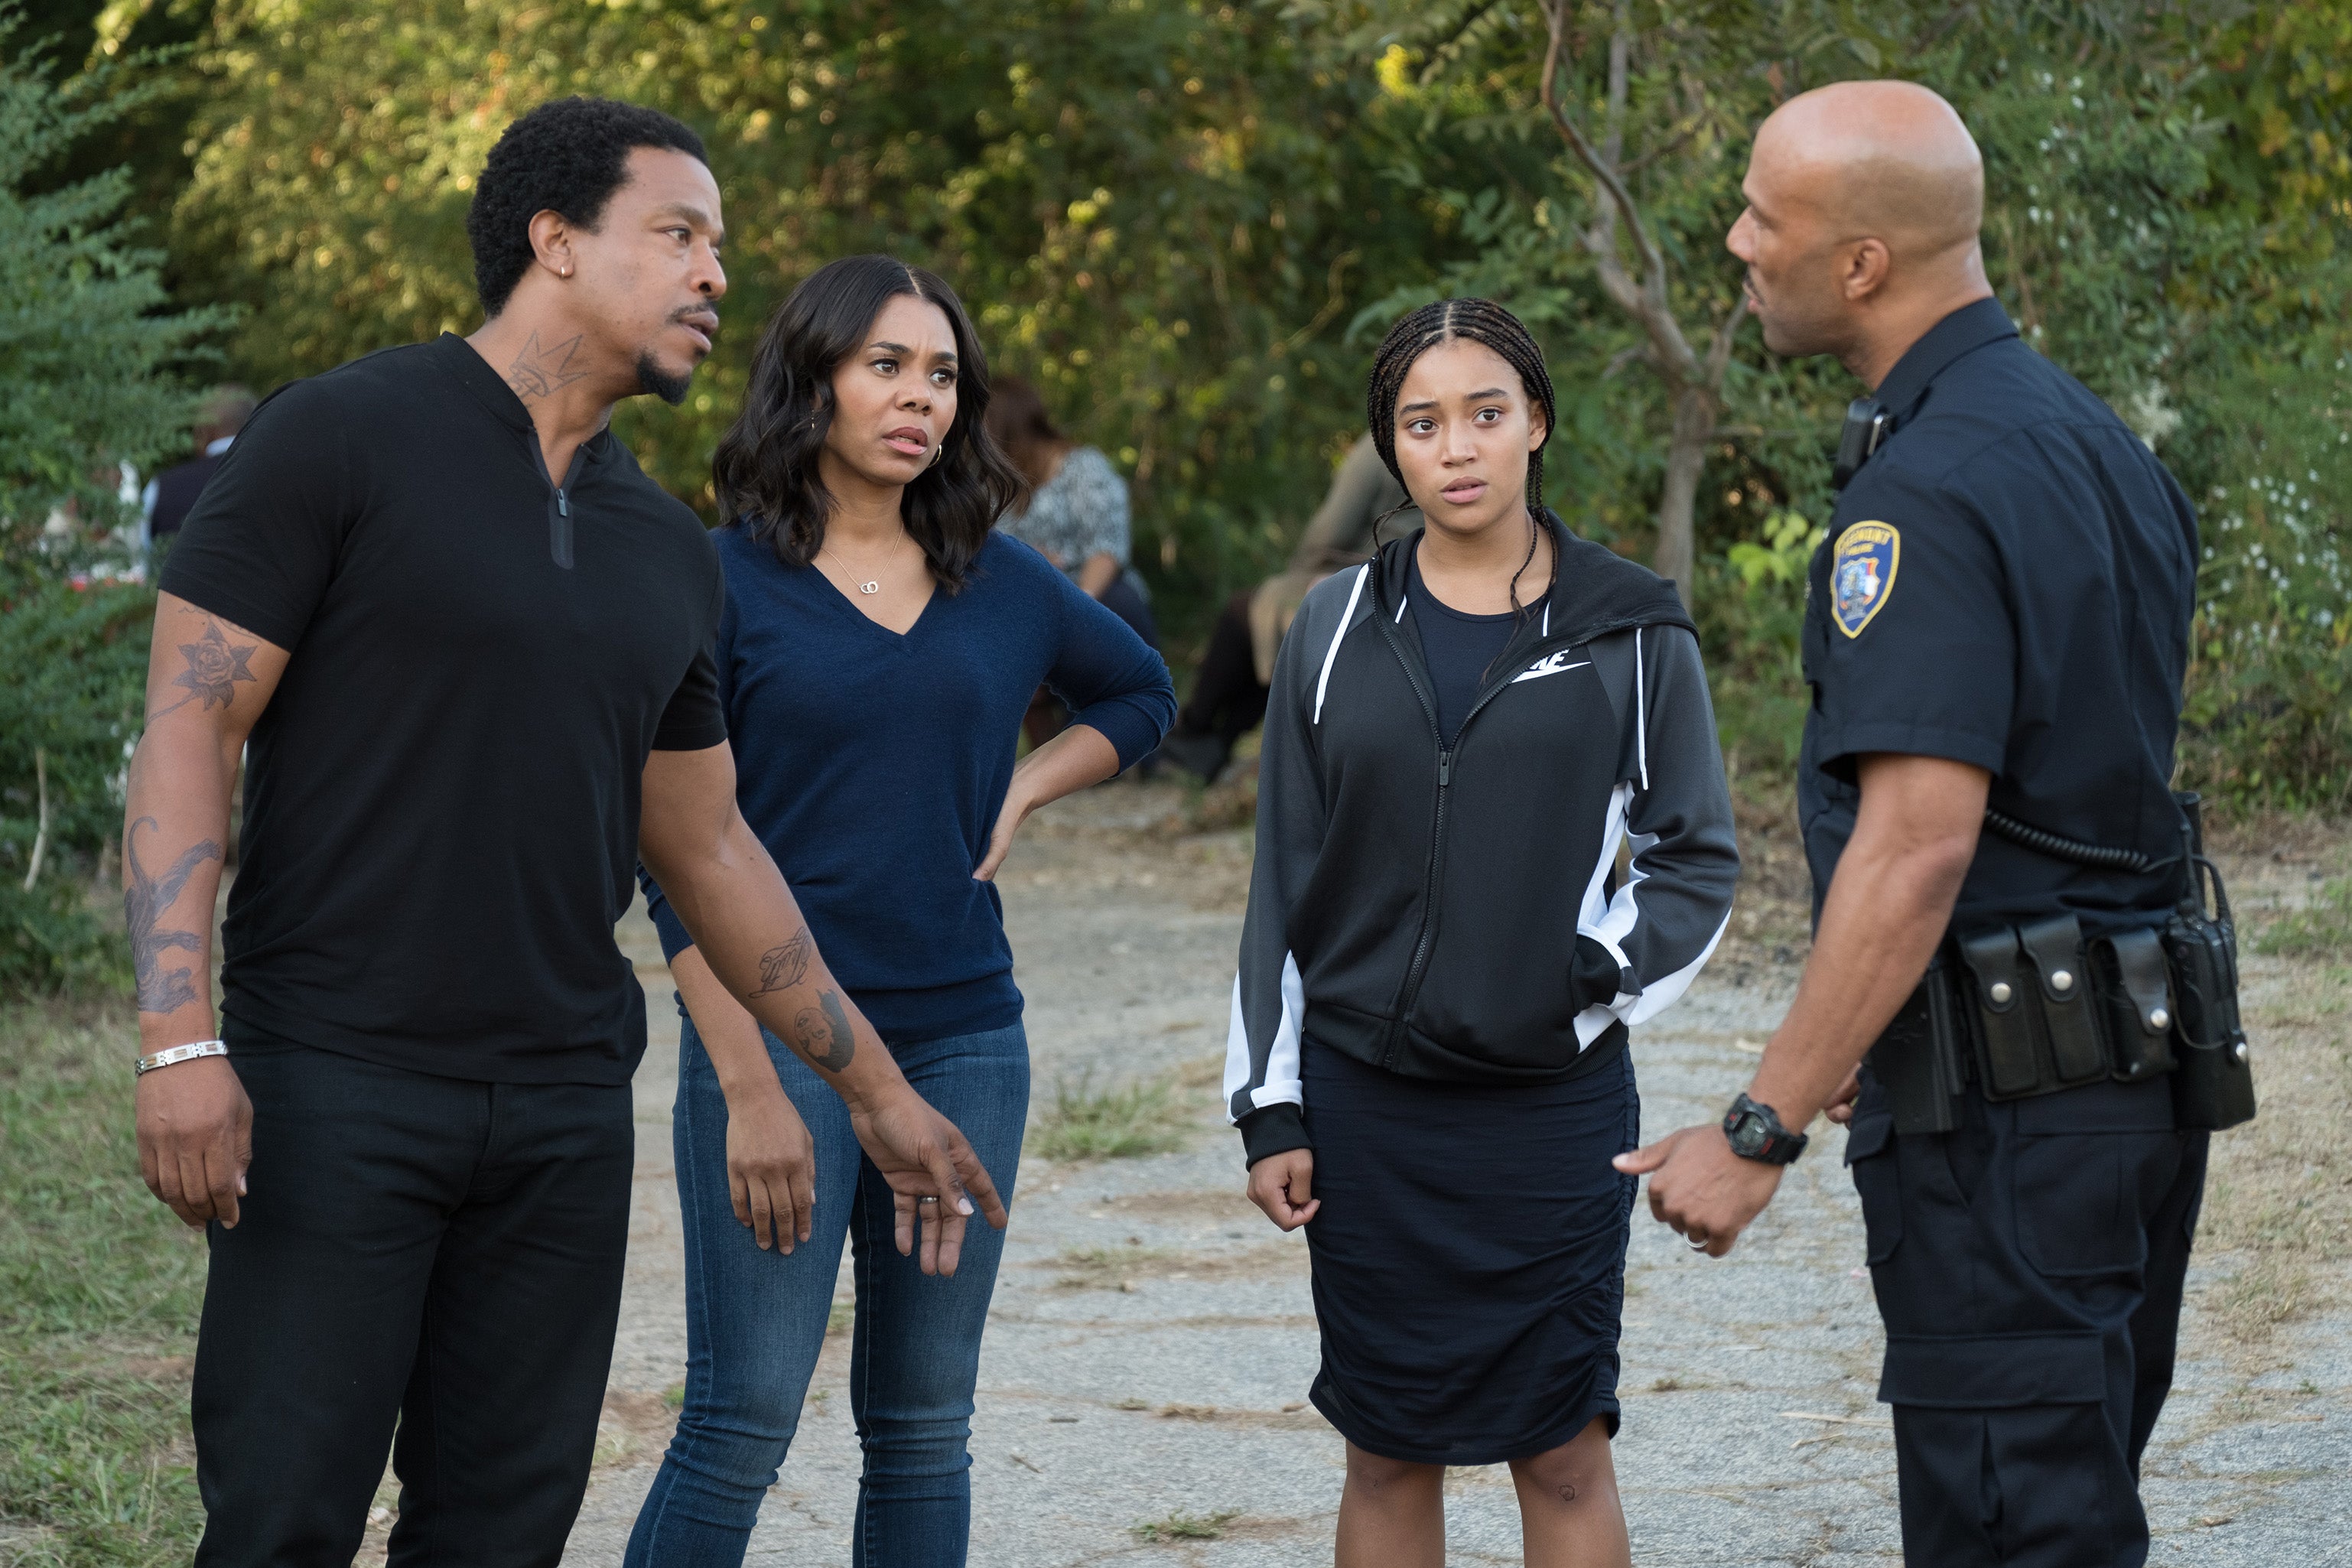 Russell Hornsby, Regina Hall, Amandla Stenberg, and Common. Common wears a navy police uniform.